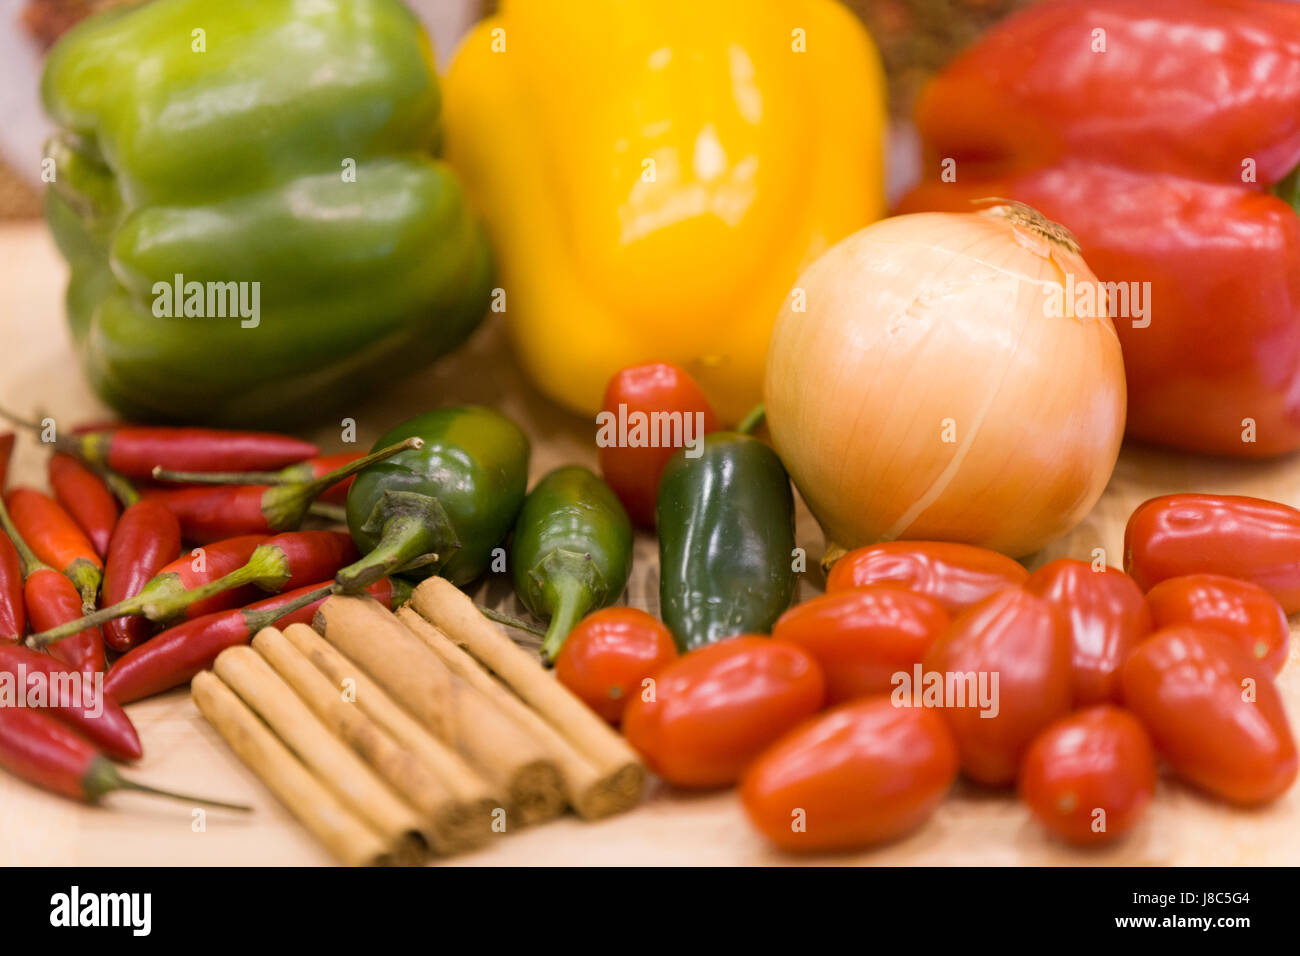 Healthy vegetables. Stock Photo